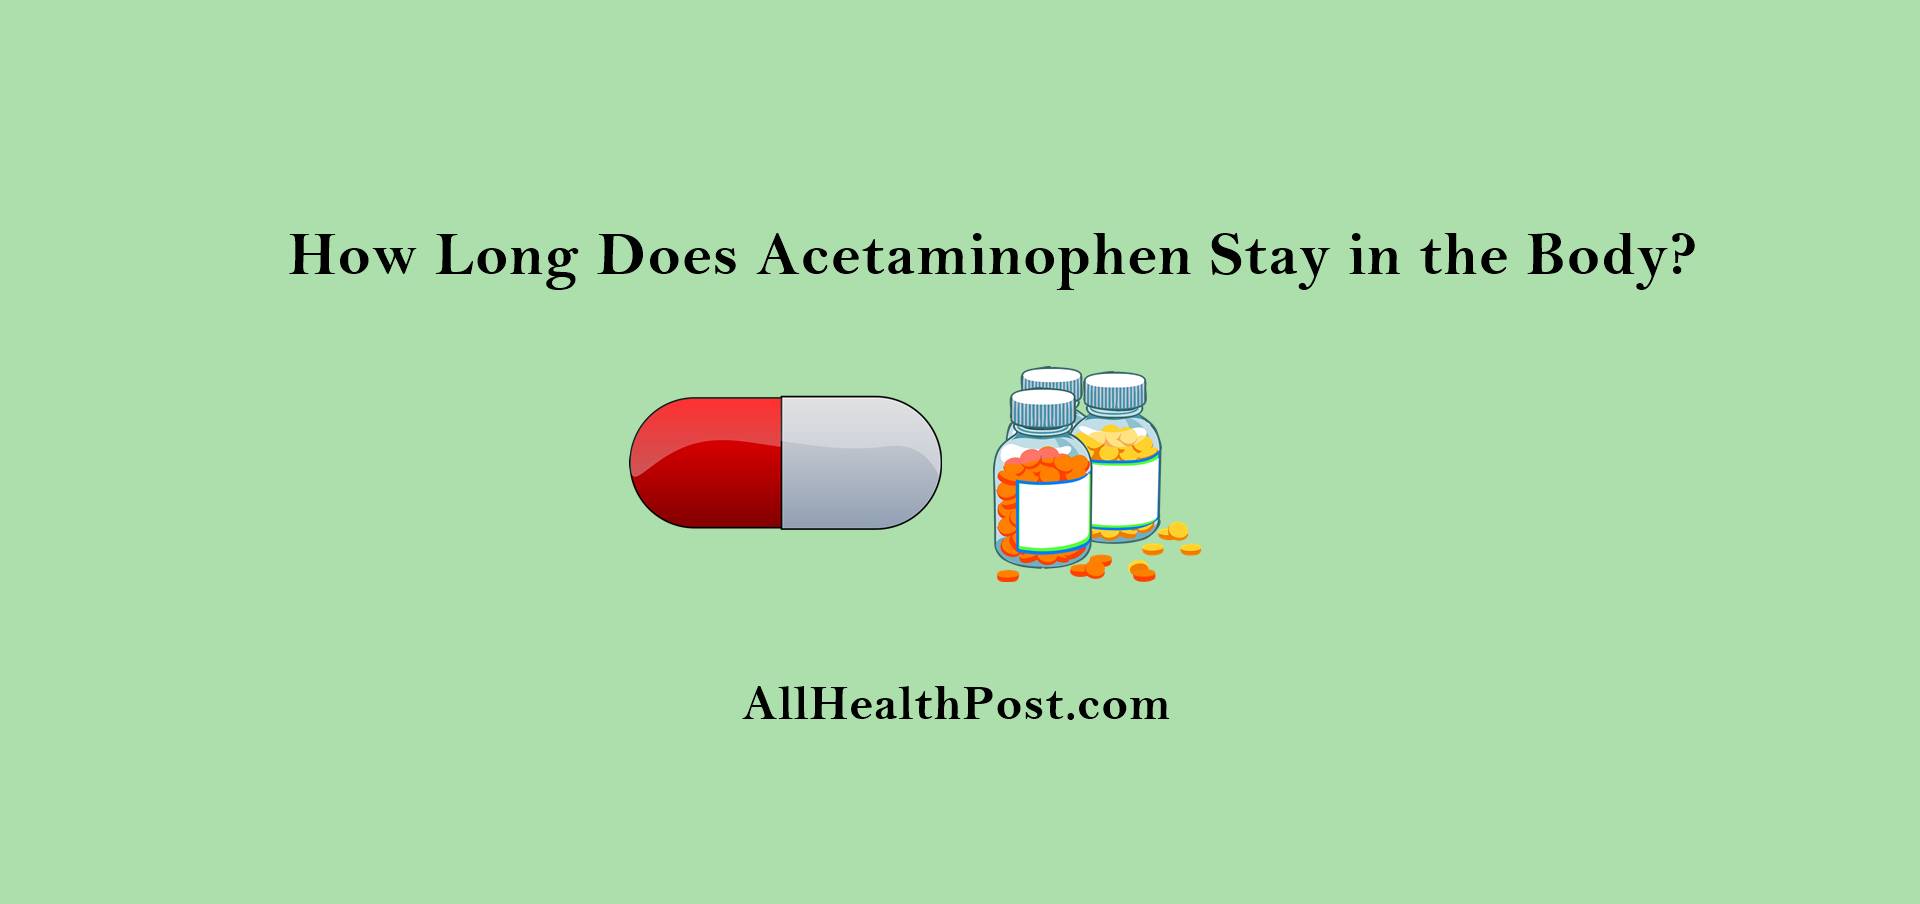 How Long Does Acetaminophen Stay in the Body?